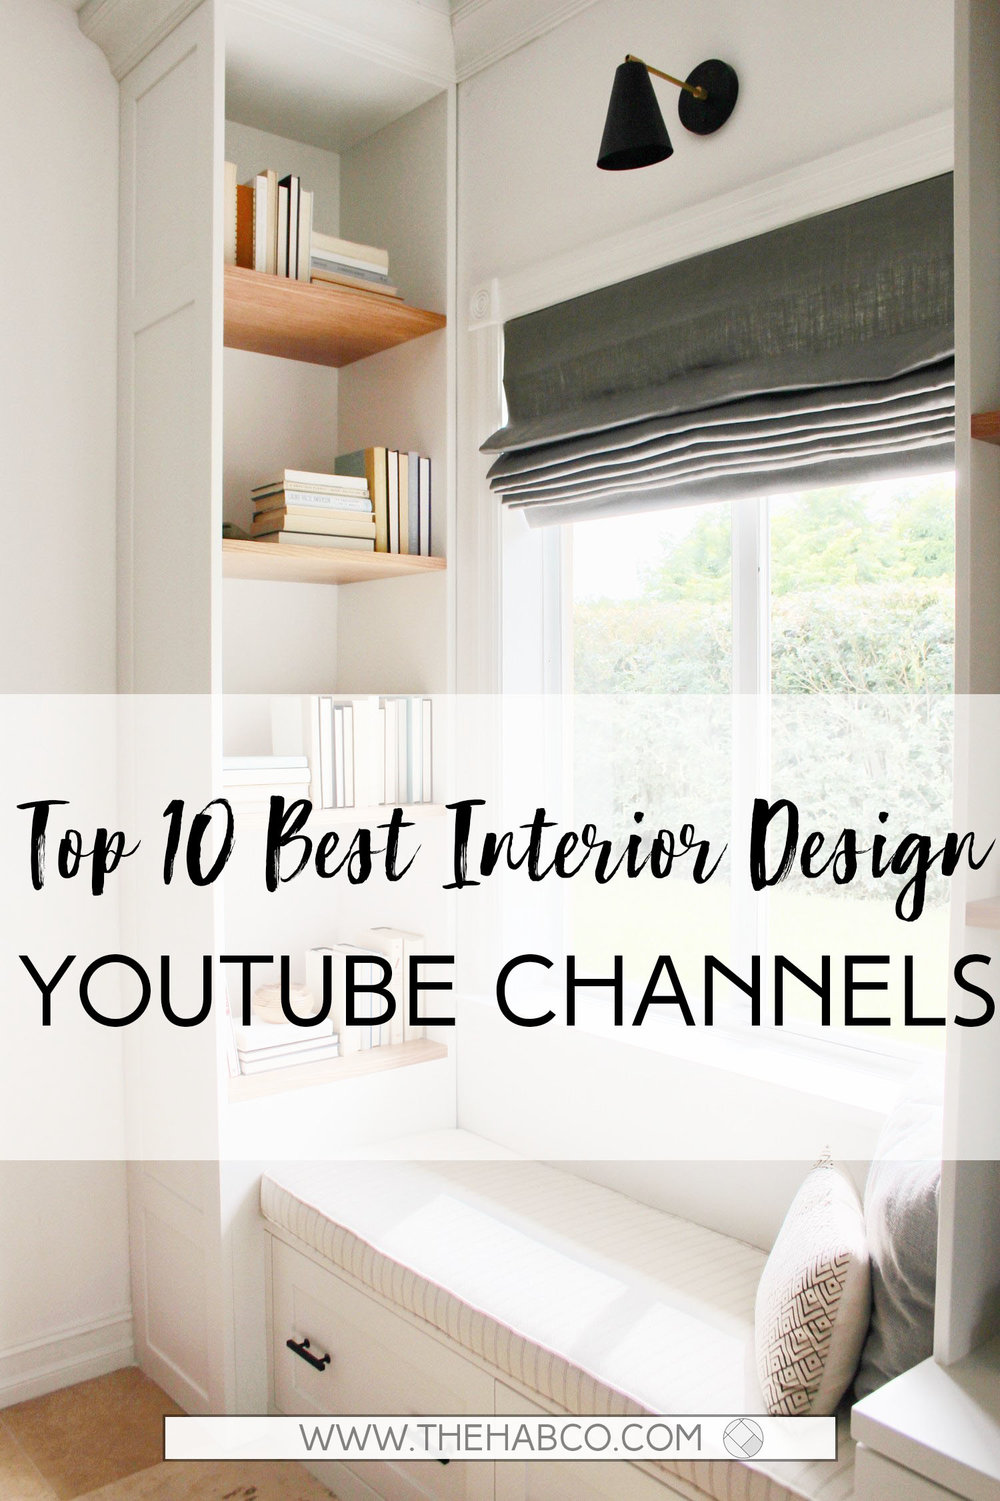 Top 10 Best Interior Design YouTube Channels — The Habitat Collective -  Miami Residential Interior Design Firm